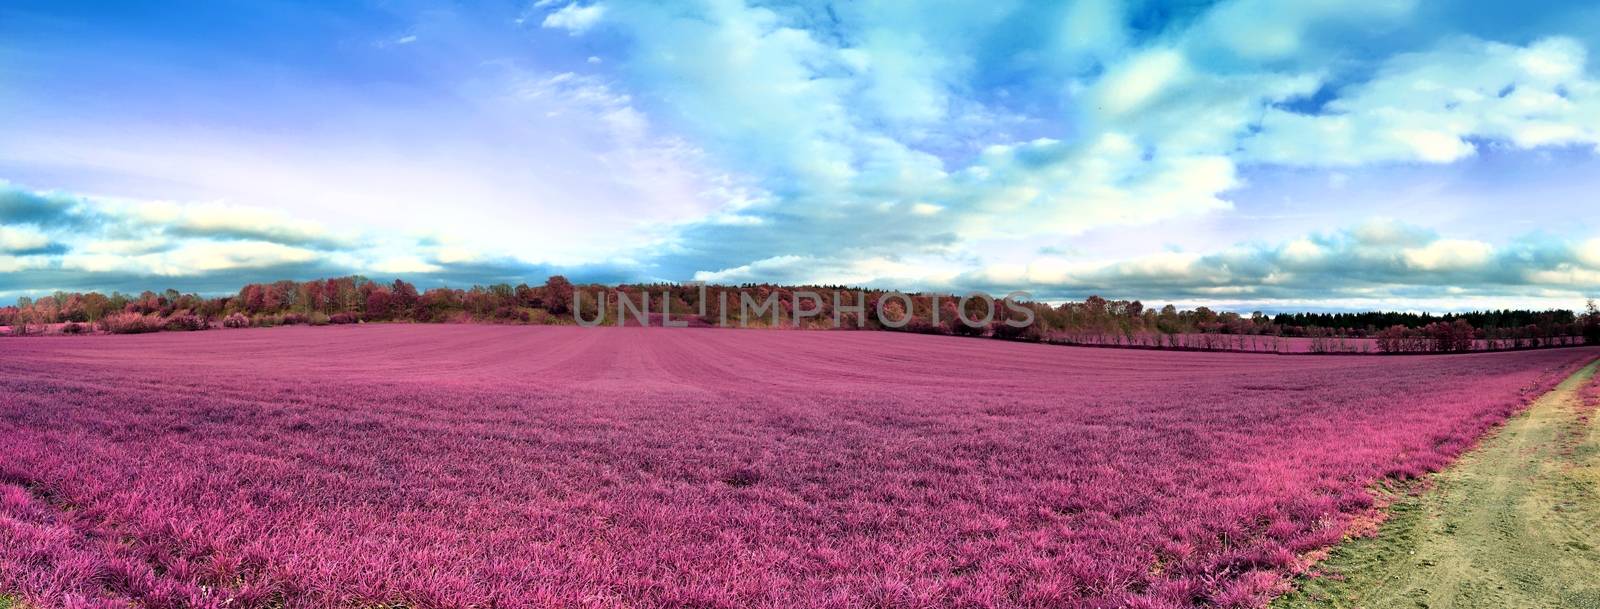 Beautiful and colorful fantasy landscape in an asian purple infr by MP_foto71